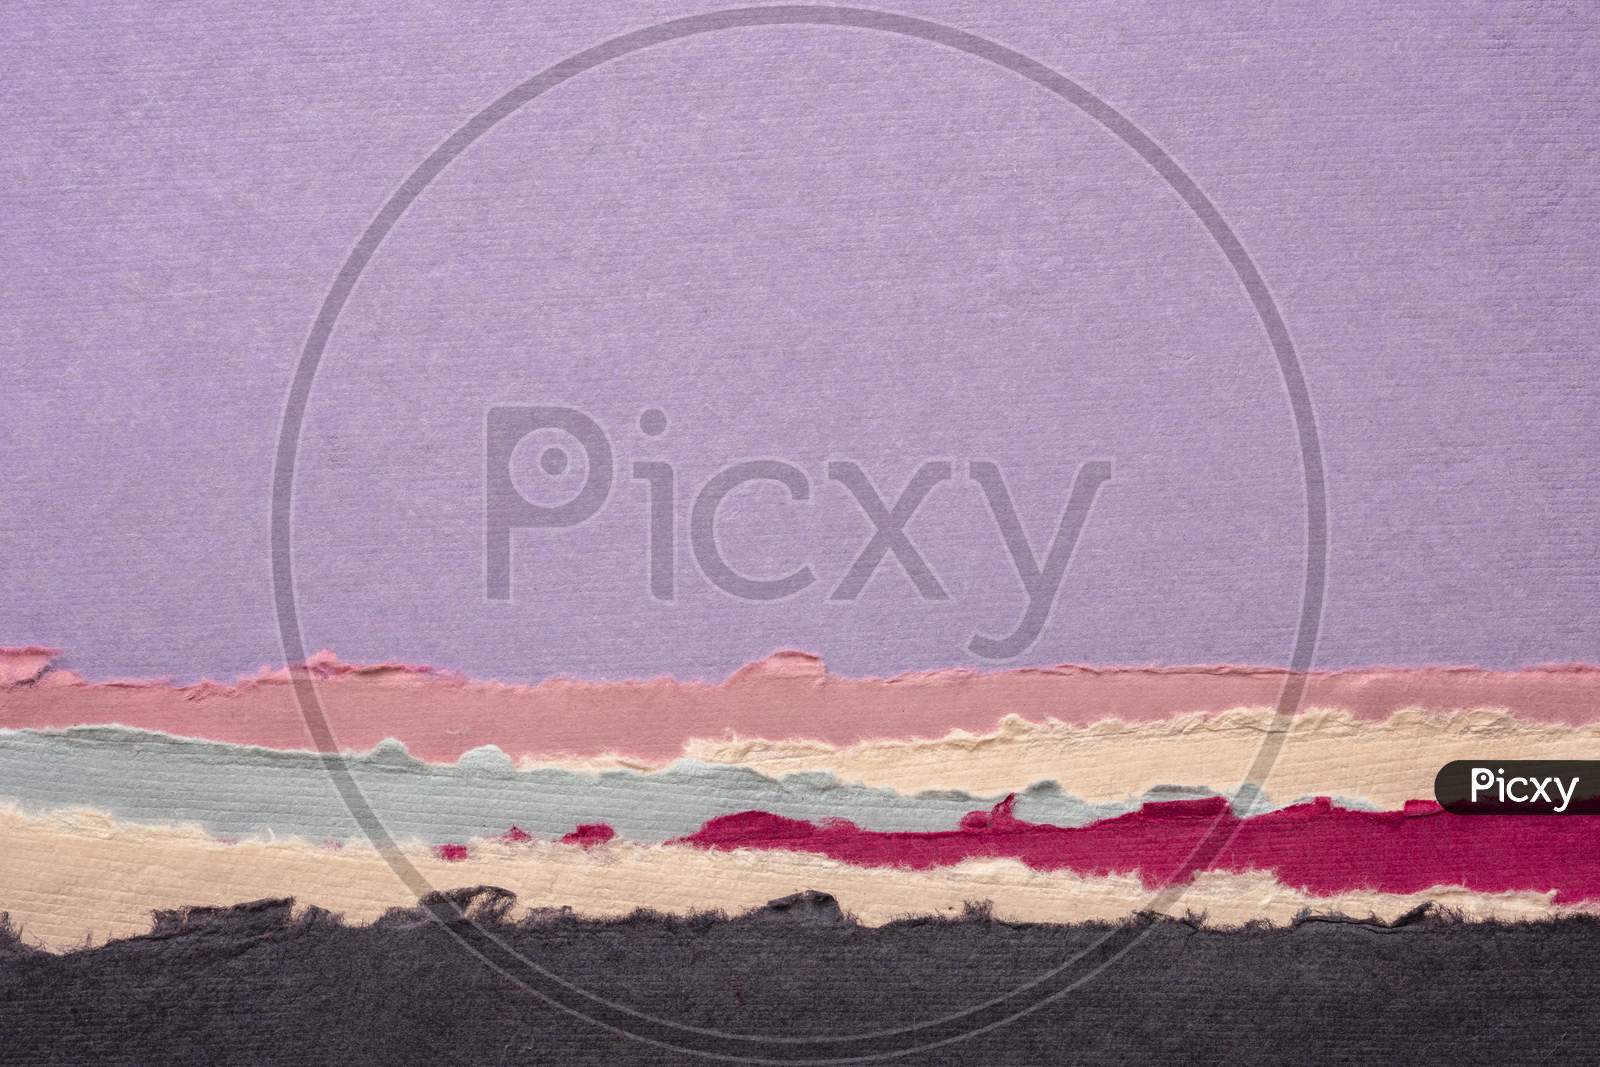 Dawn Or Dusk Abstract Landscape In Pink And Purple Tones - A Collection Of Colorful Handmade Indian Papers Produced From Recycled Cotton Fabric